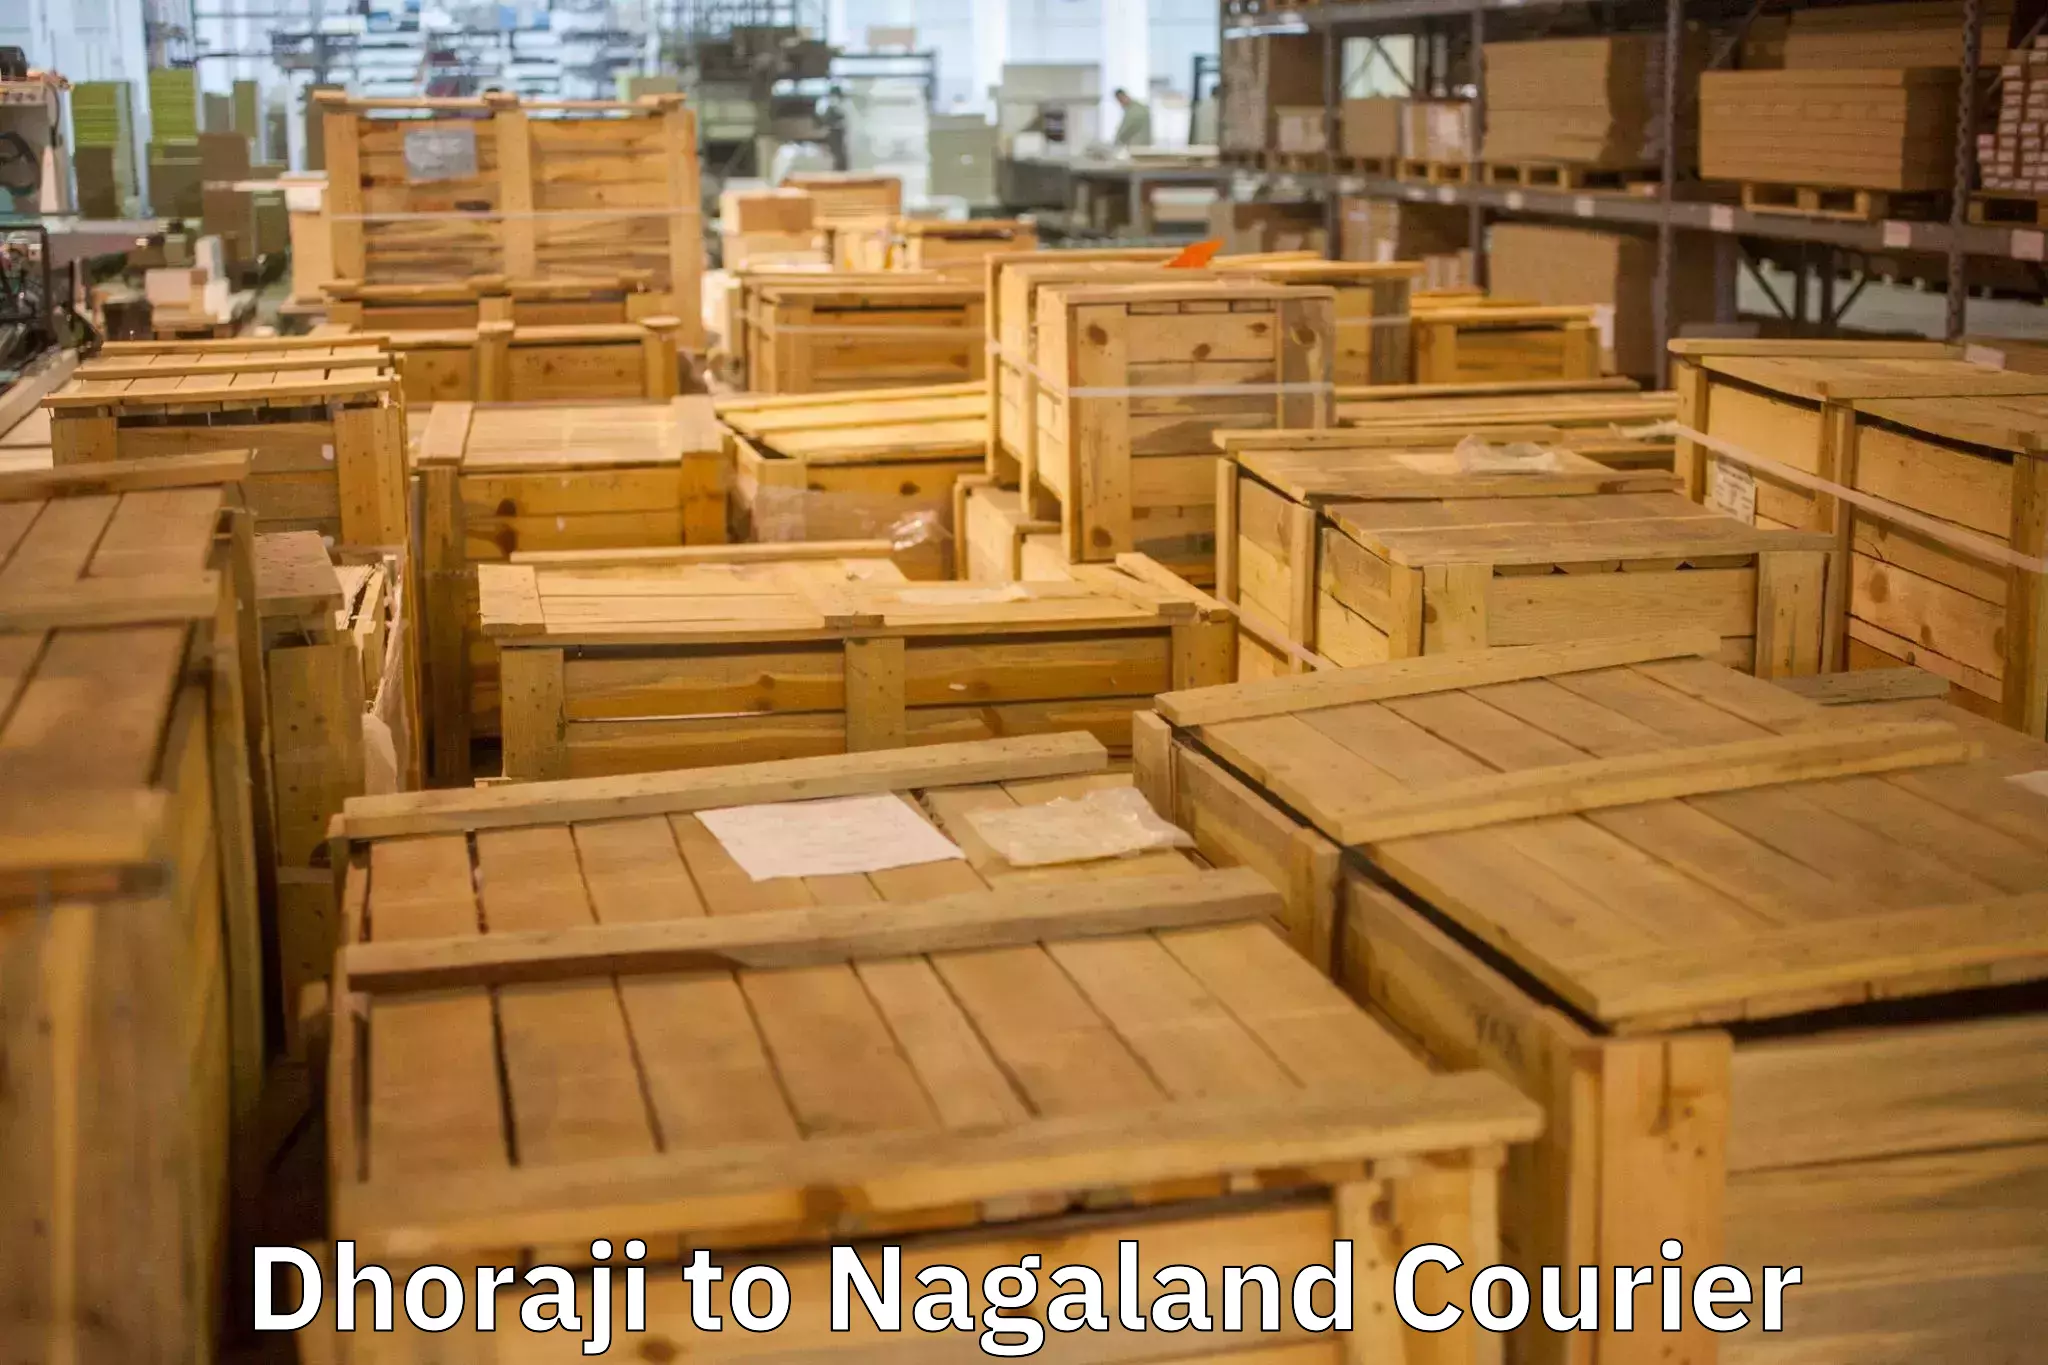 Moving and storage services Dhoraji to Nagaland